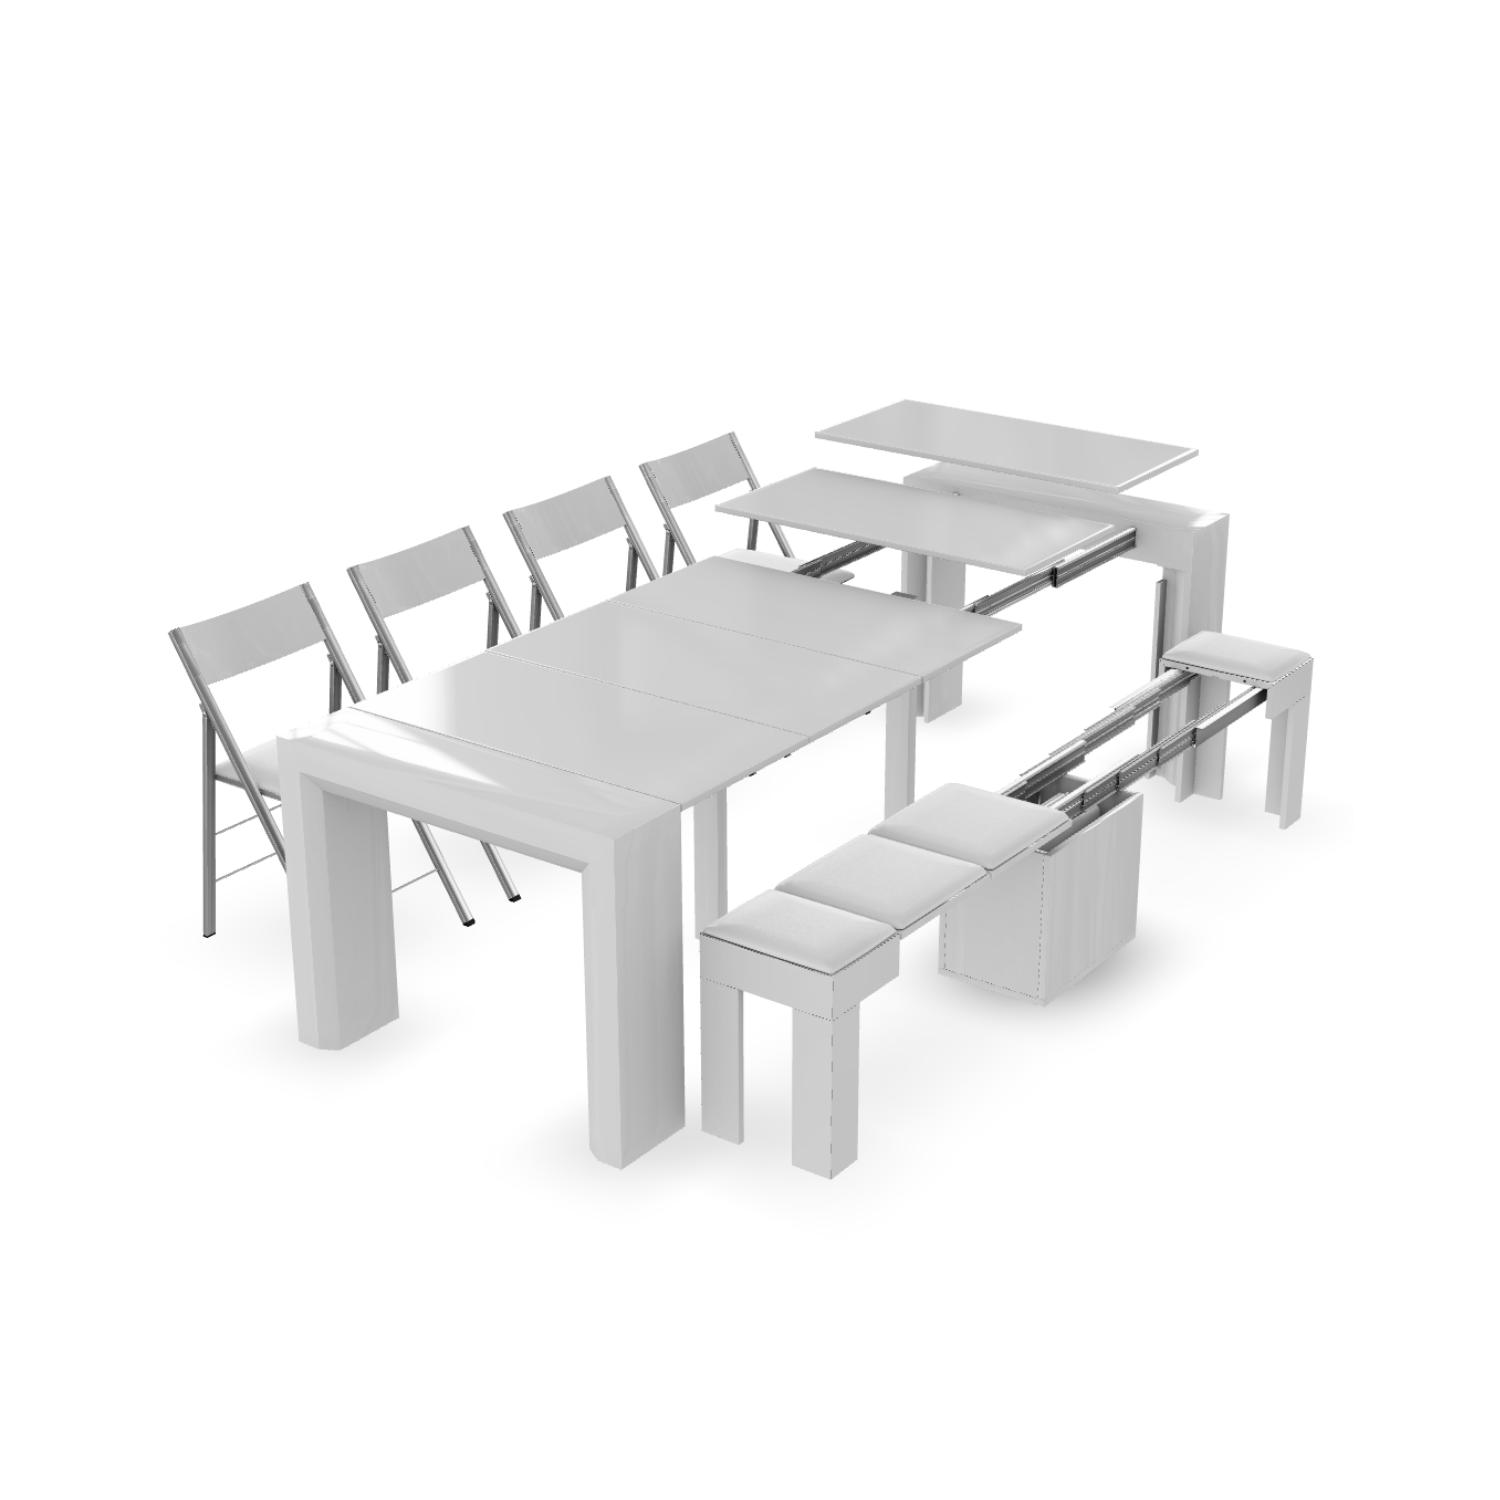 Tables, Chairs & Dishes for Giants